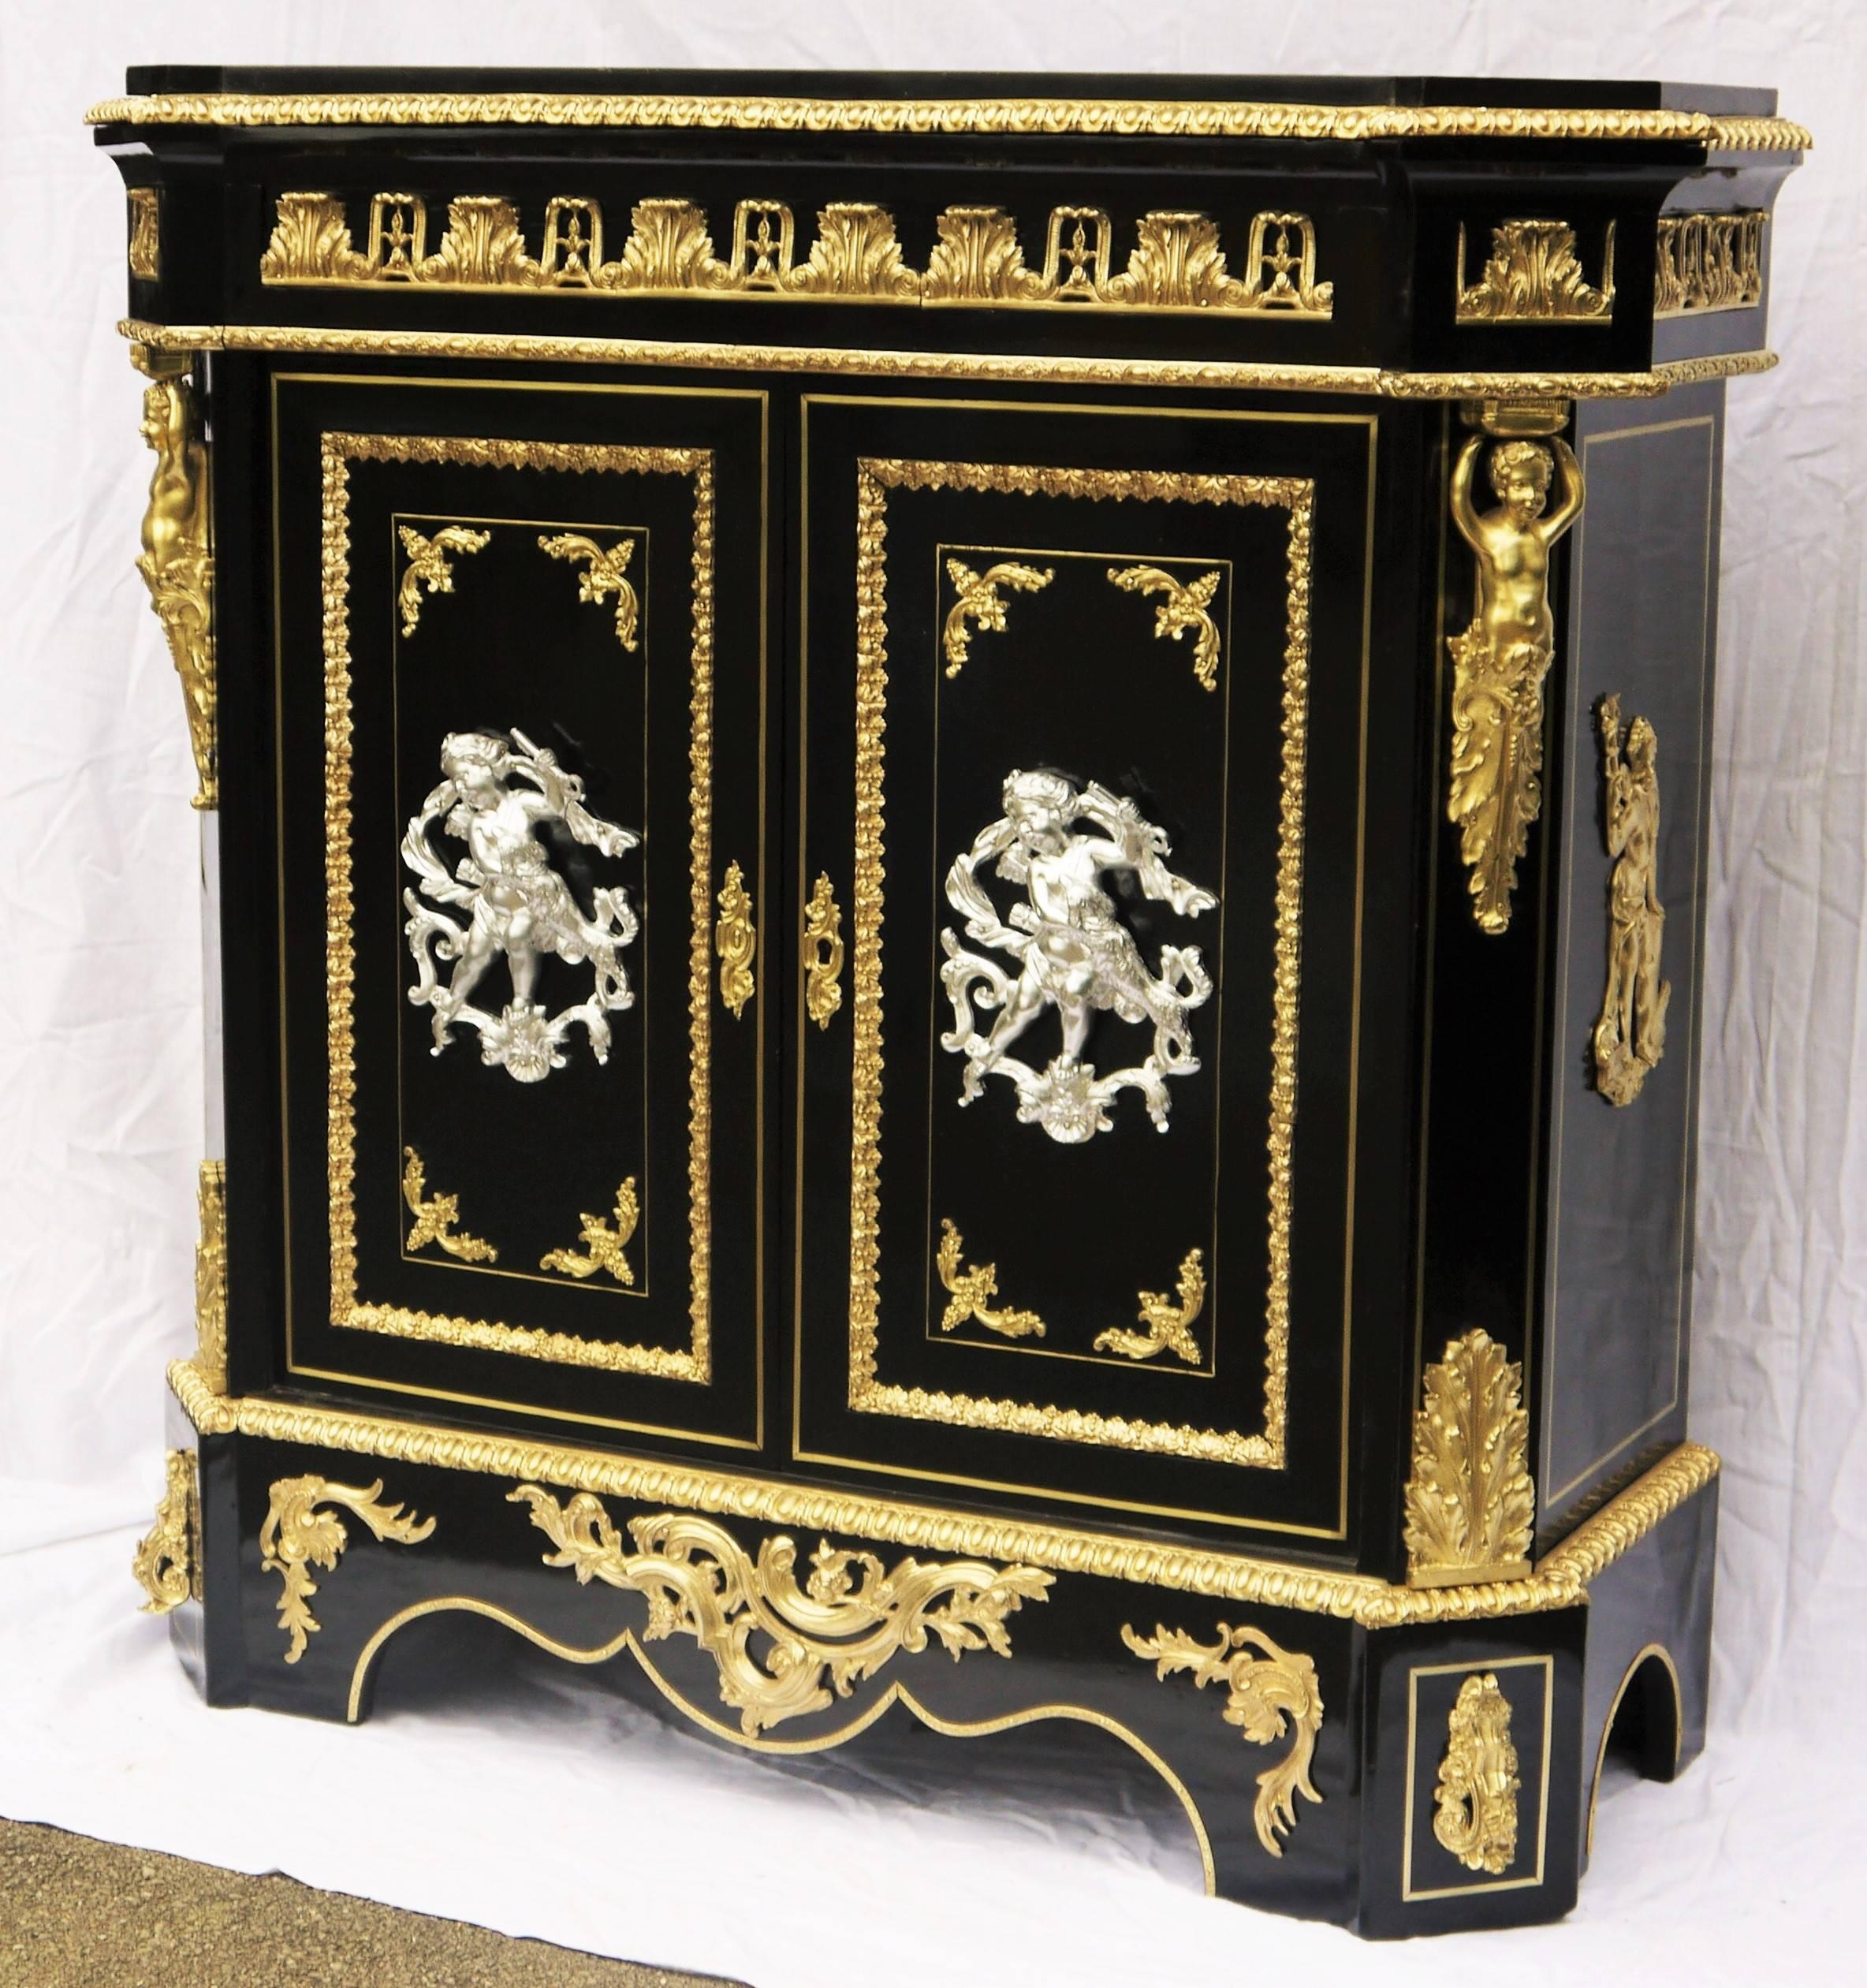 French cabinet in Boule style marquetry, two doors, ebony veneer.
Fabulous and impressive gilt bronze ornamentations, in an excellent quality incredible decoration: more than 15 kilos of Gilt Bronze in total!

Gorgeous silver bronze putti at the